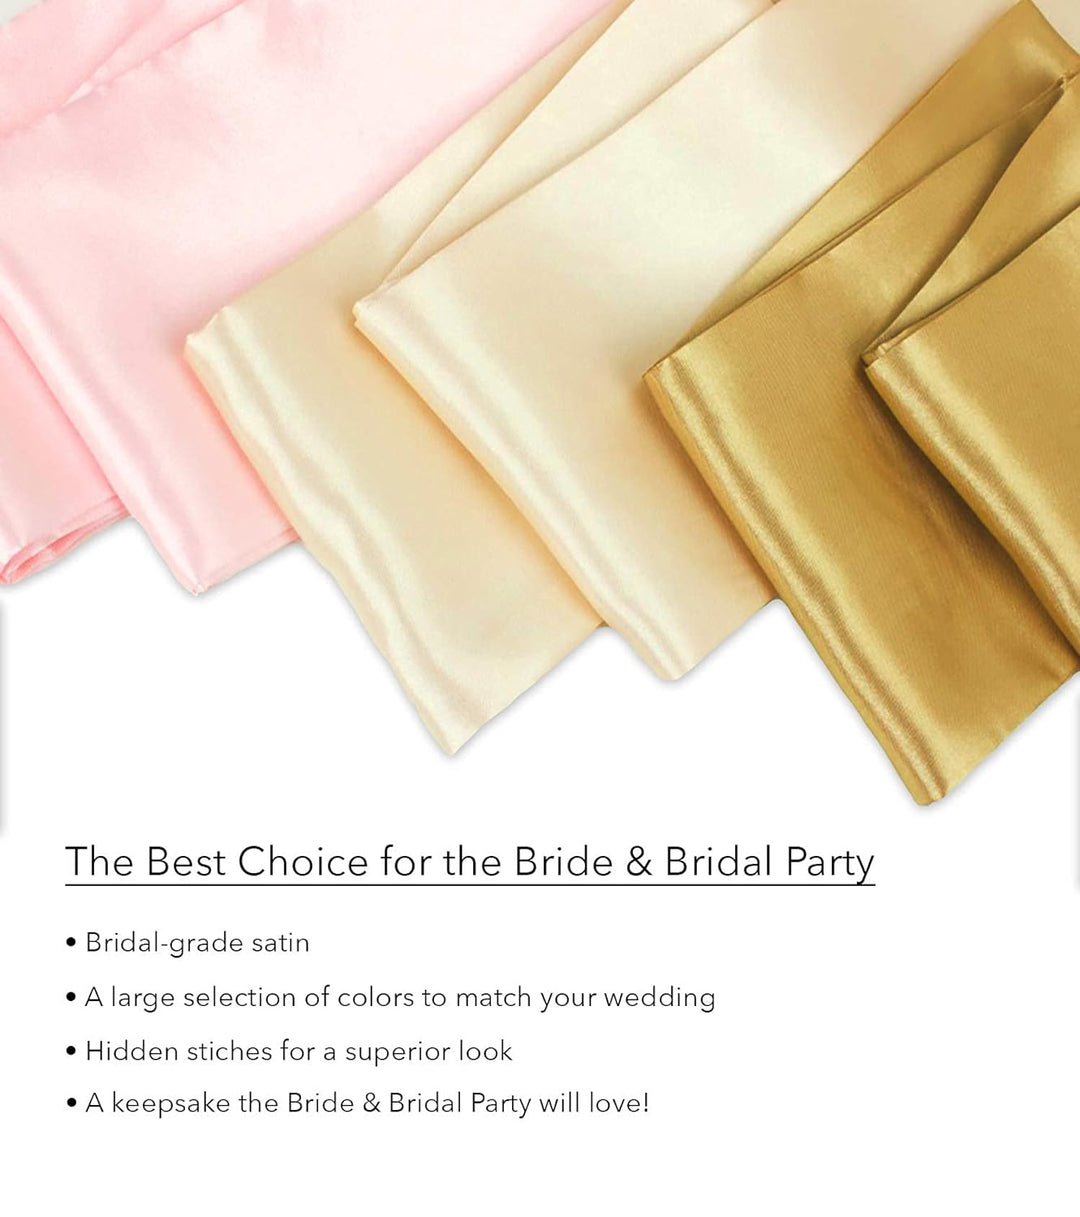 Party Propz Bride To Be Decoration Set Combo - 2pcs Bachelorette Party Decorations With Bride To Be Sash And Crown | Bridal Shower Decorations | Bride To Be Accessories | Bridal Shower Decorations Kit